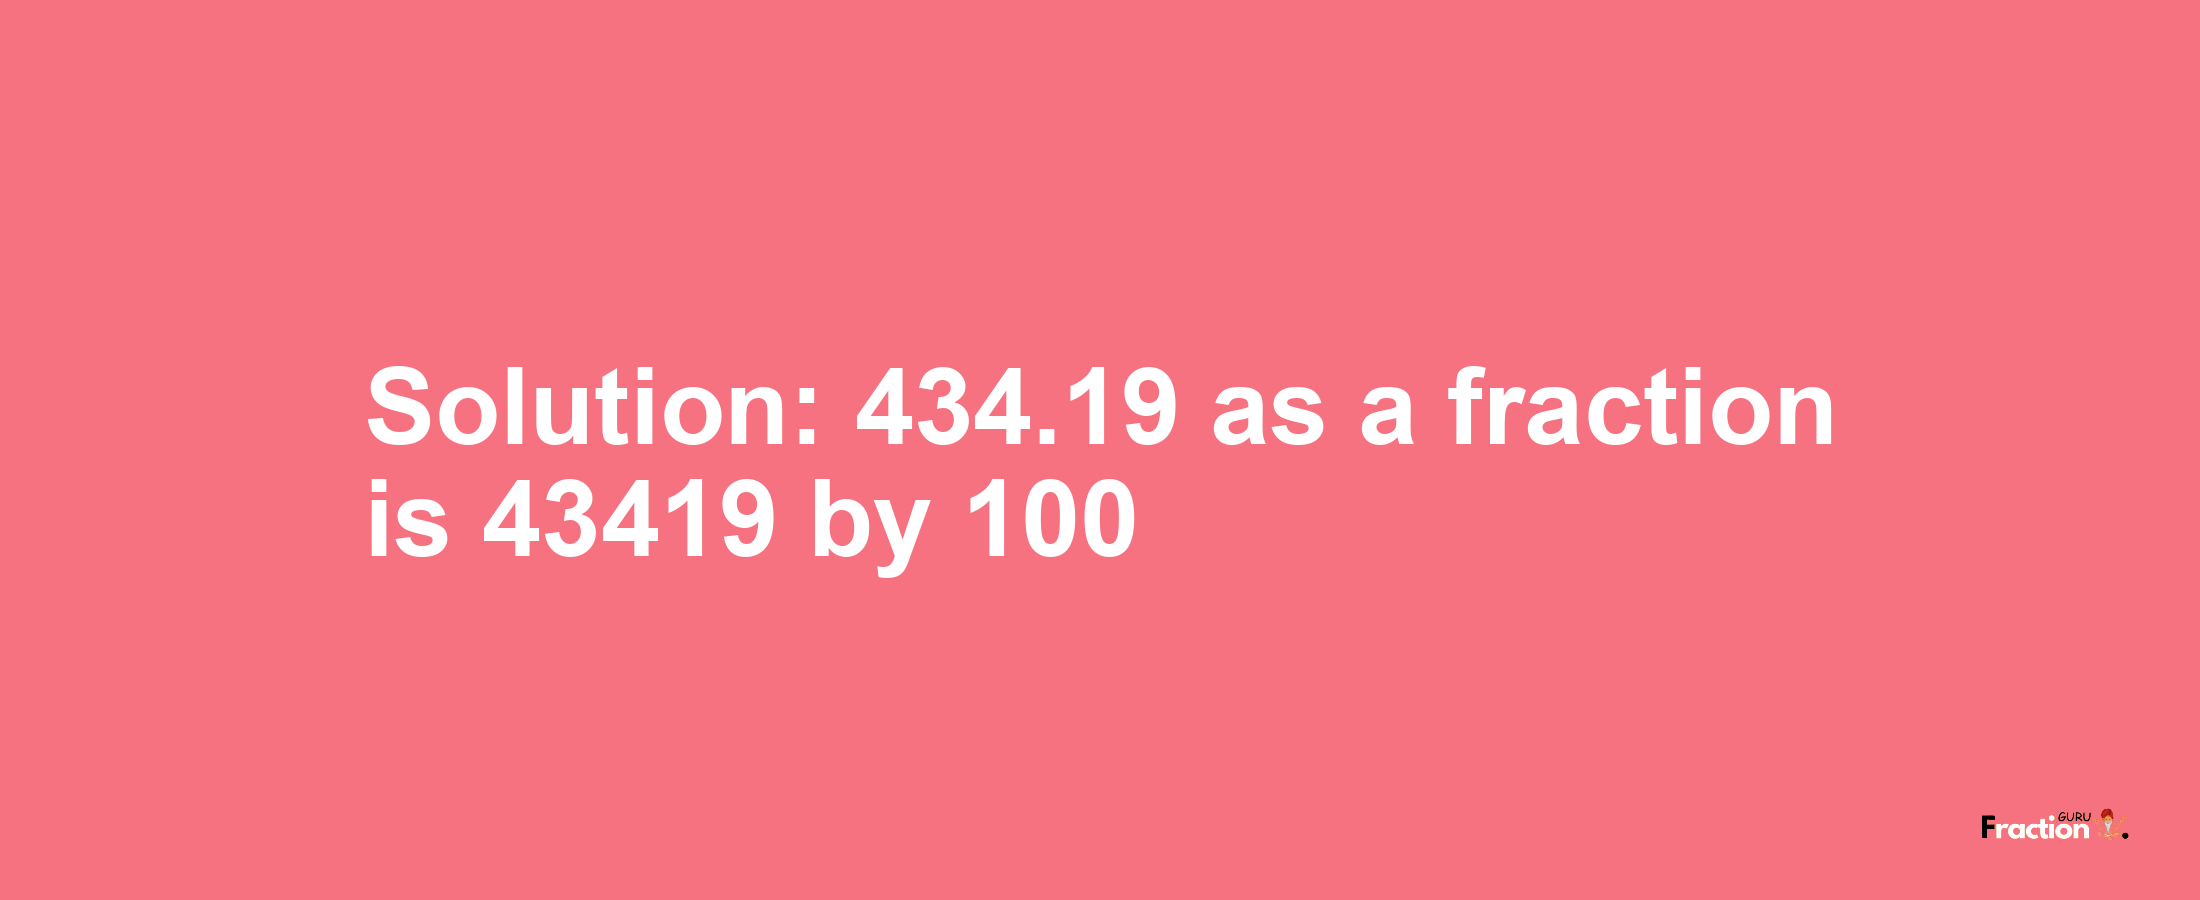 Solution:434.19 as a fraction is 43419/100